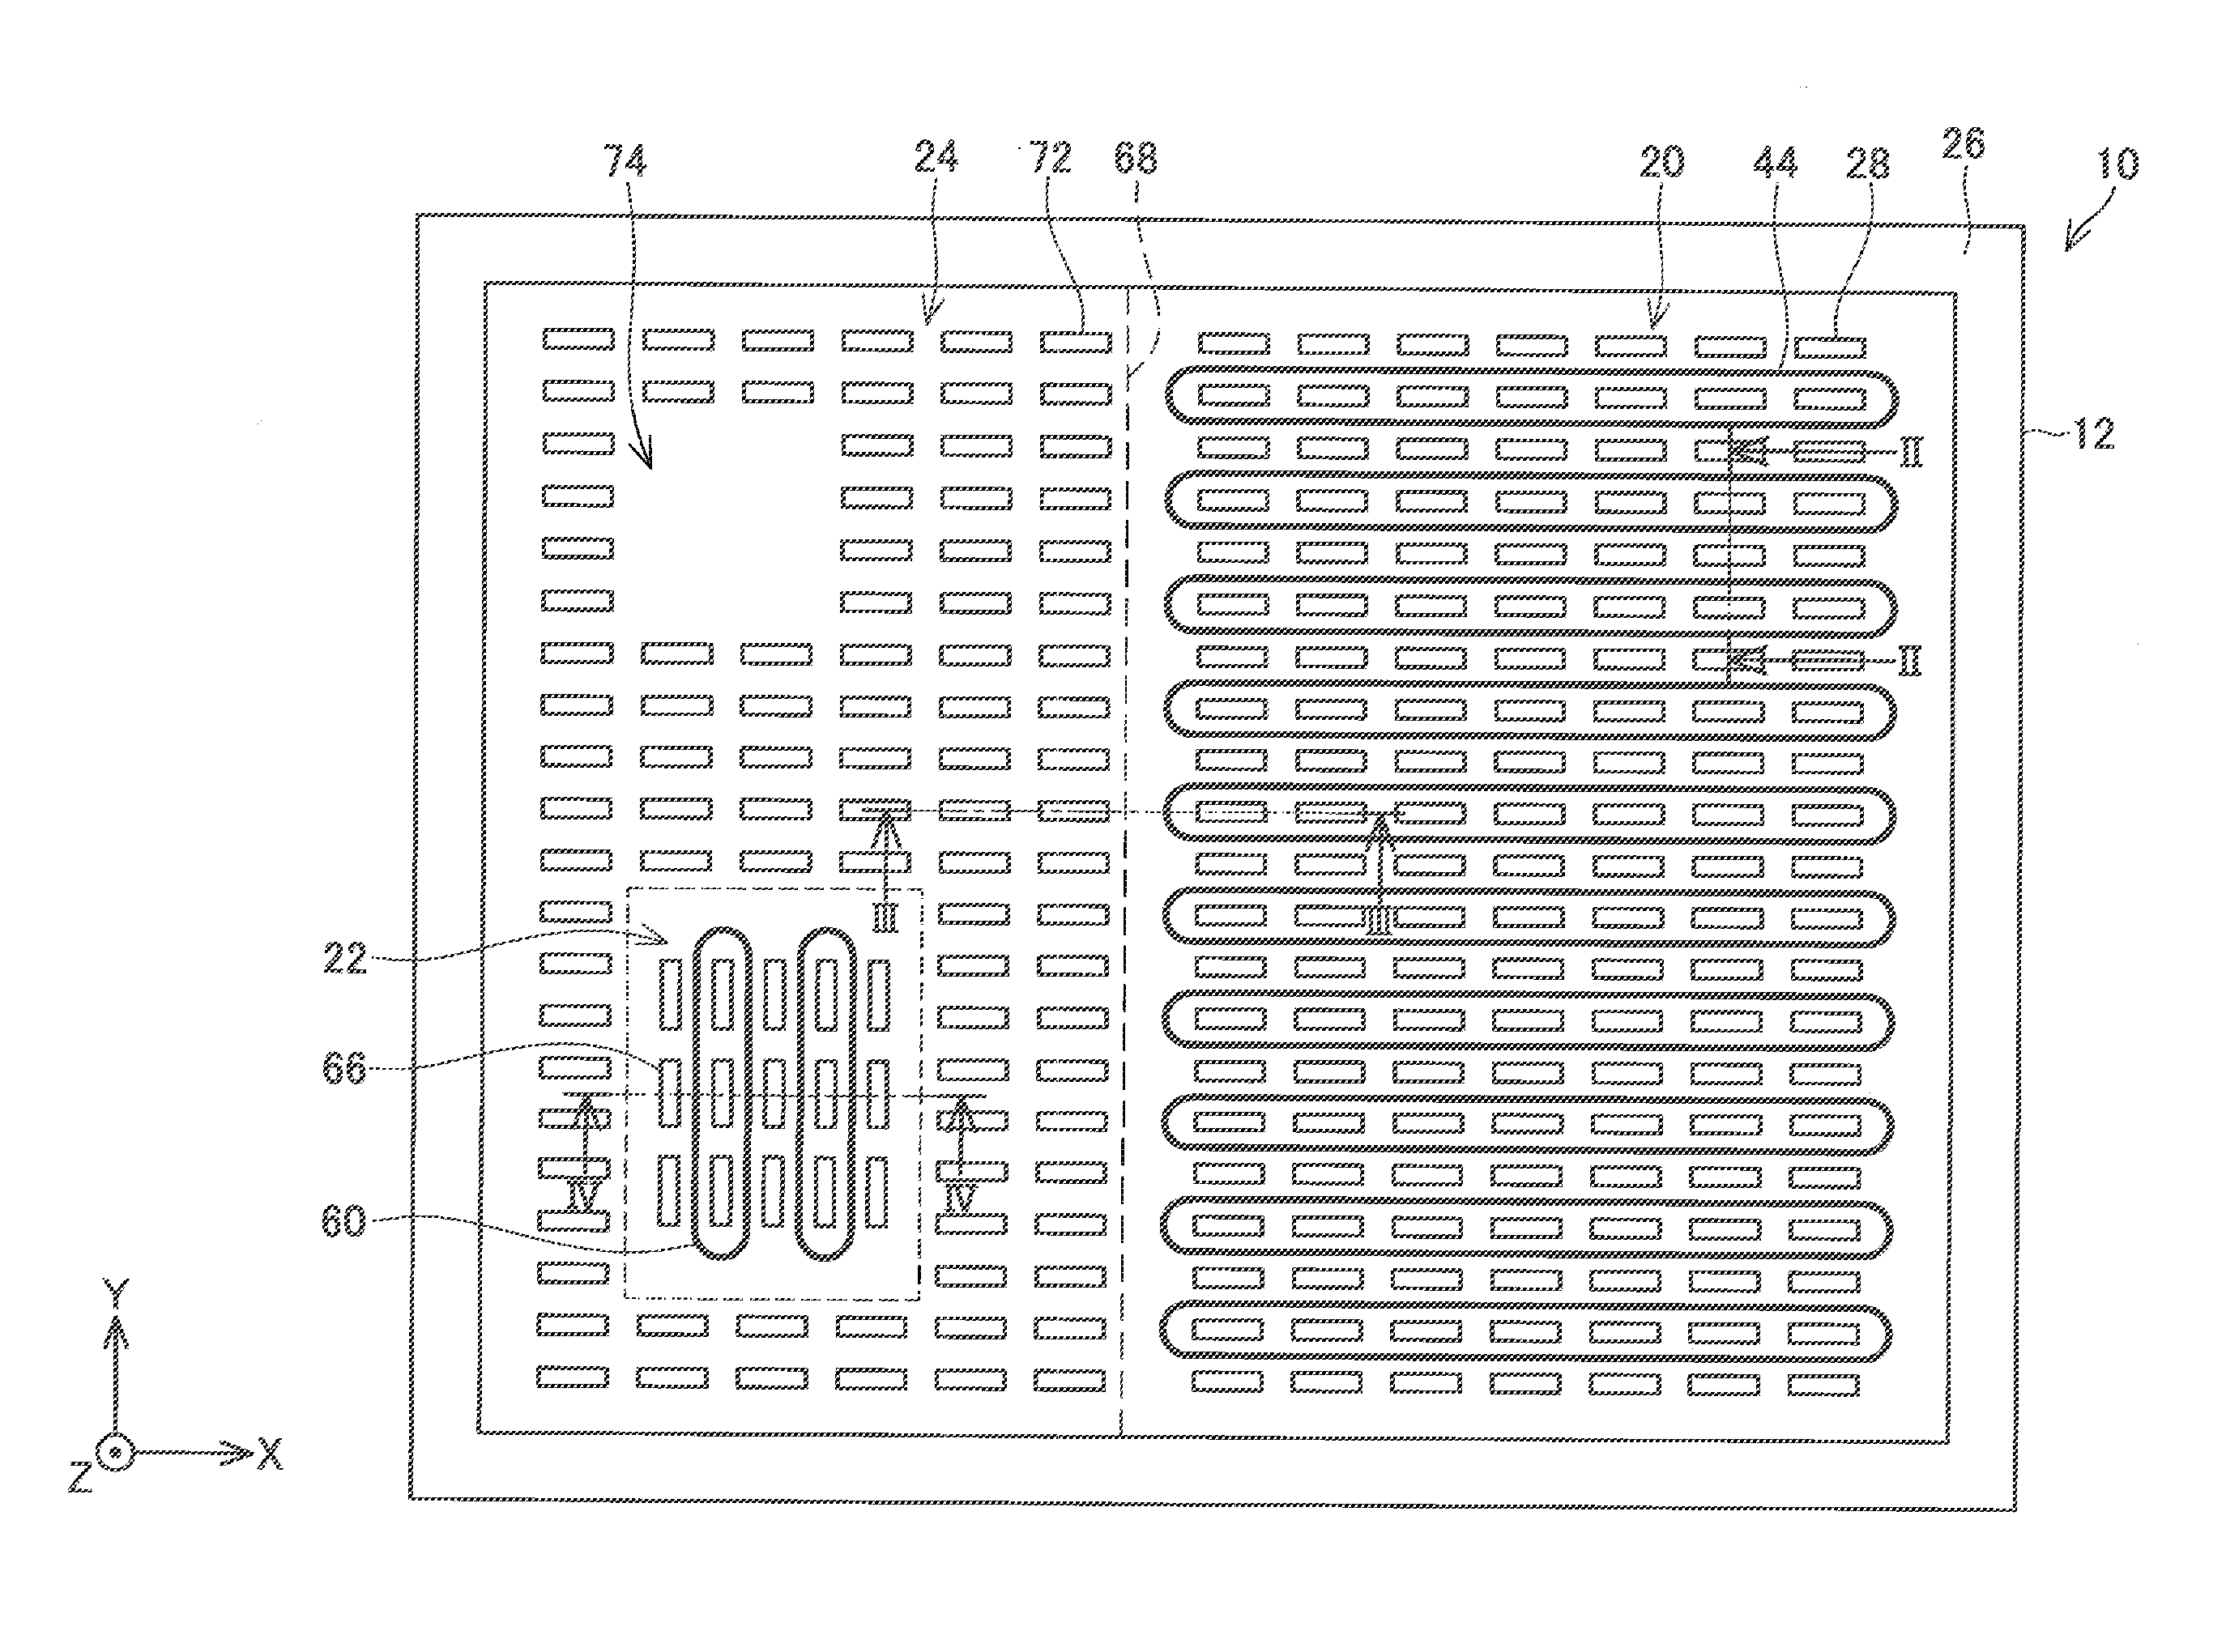 A semiconductor device comprising a main region, a current sense region, and a well region